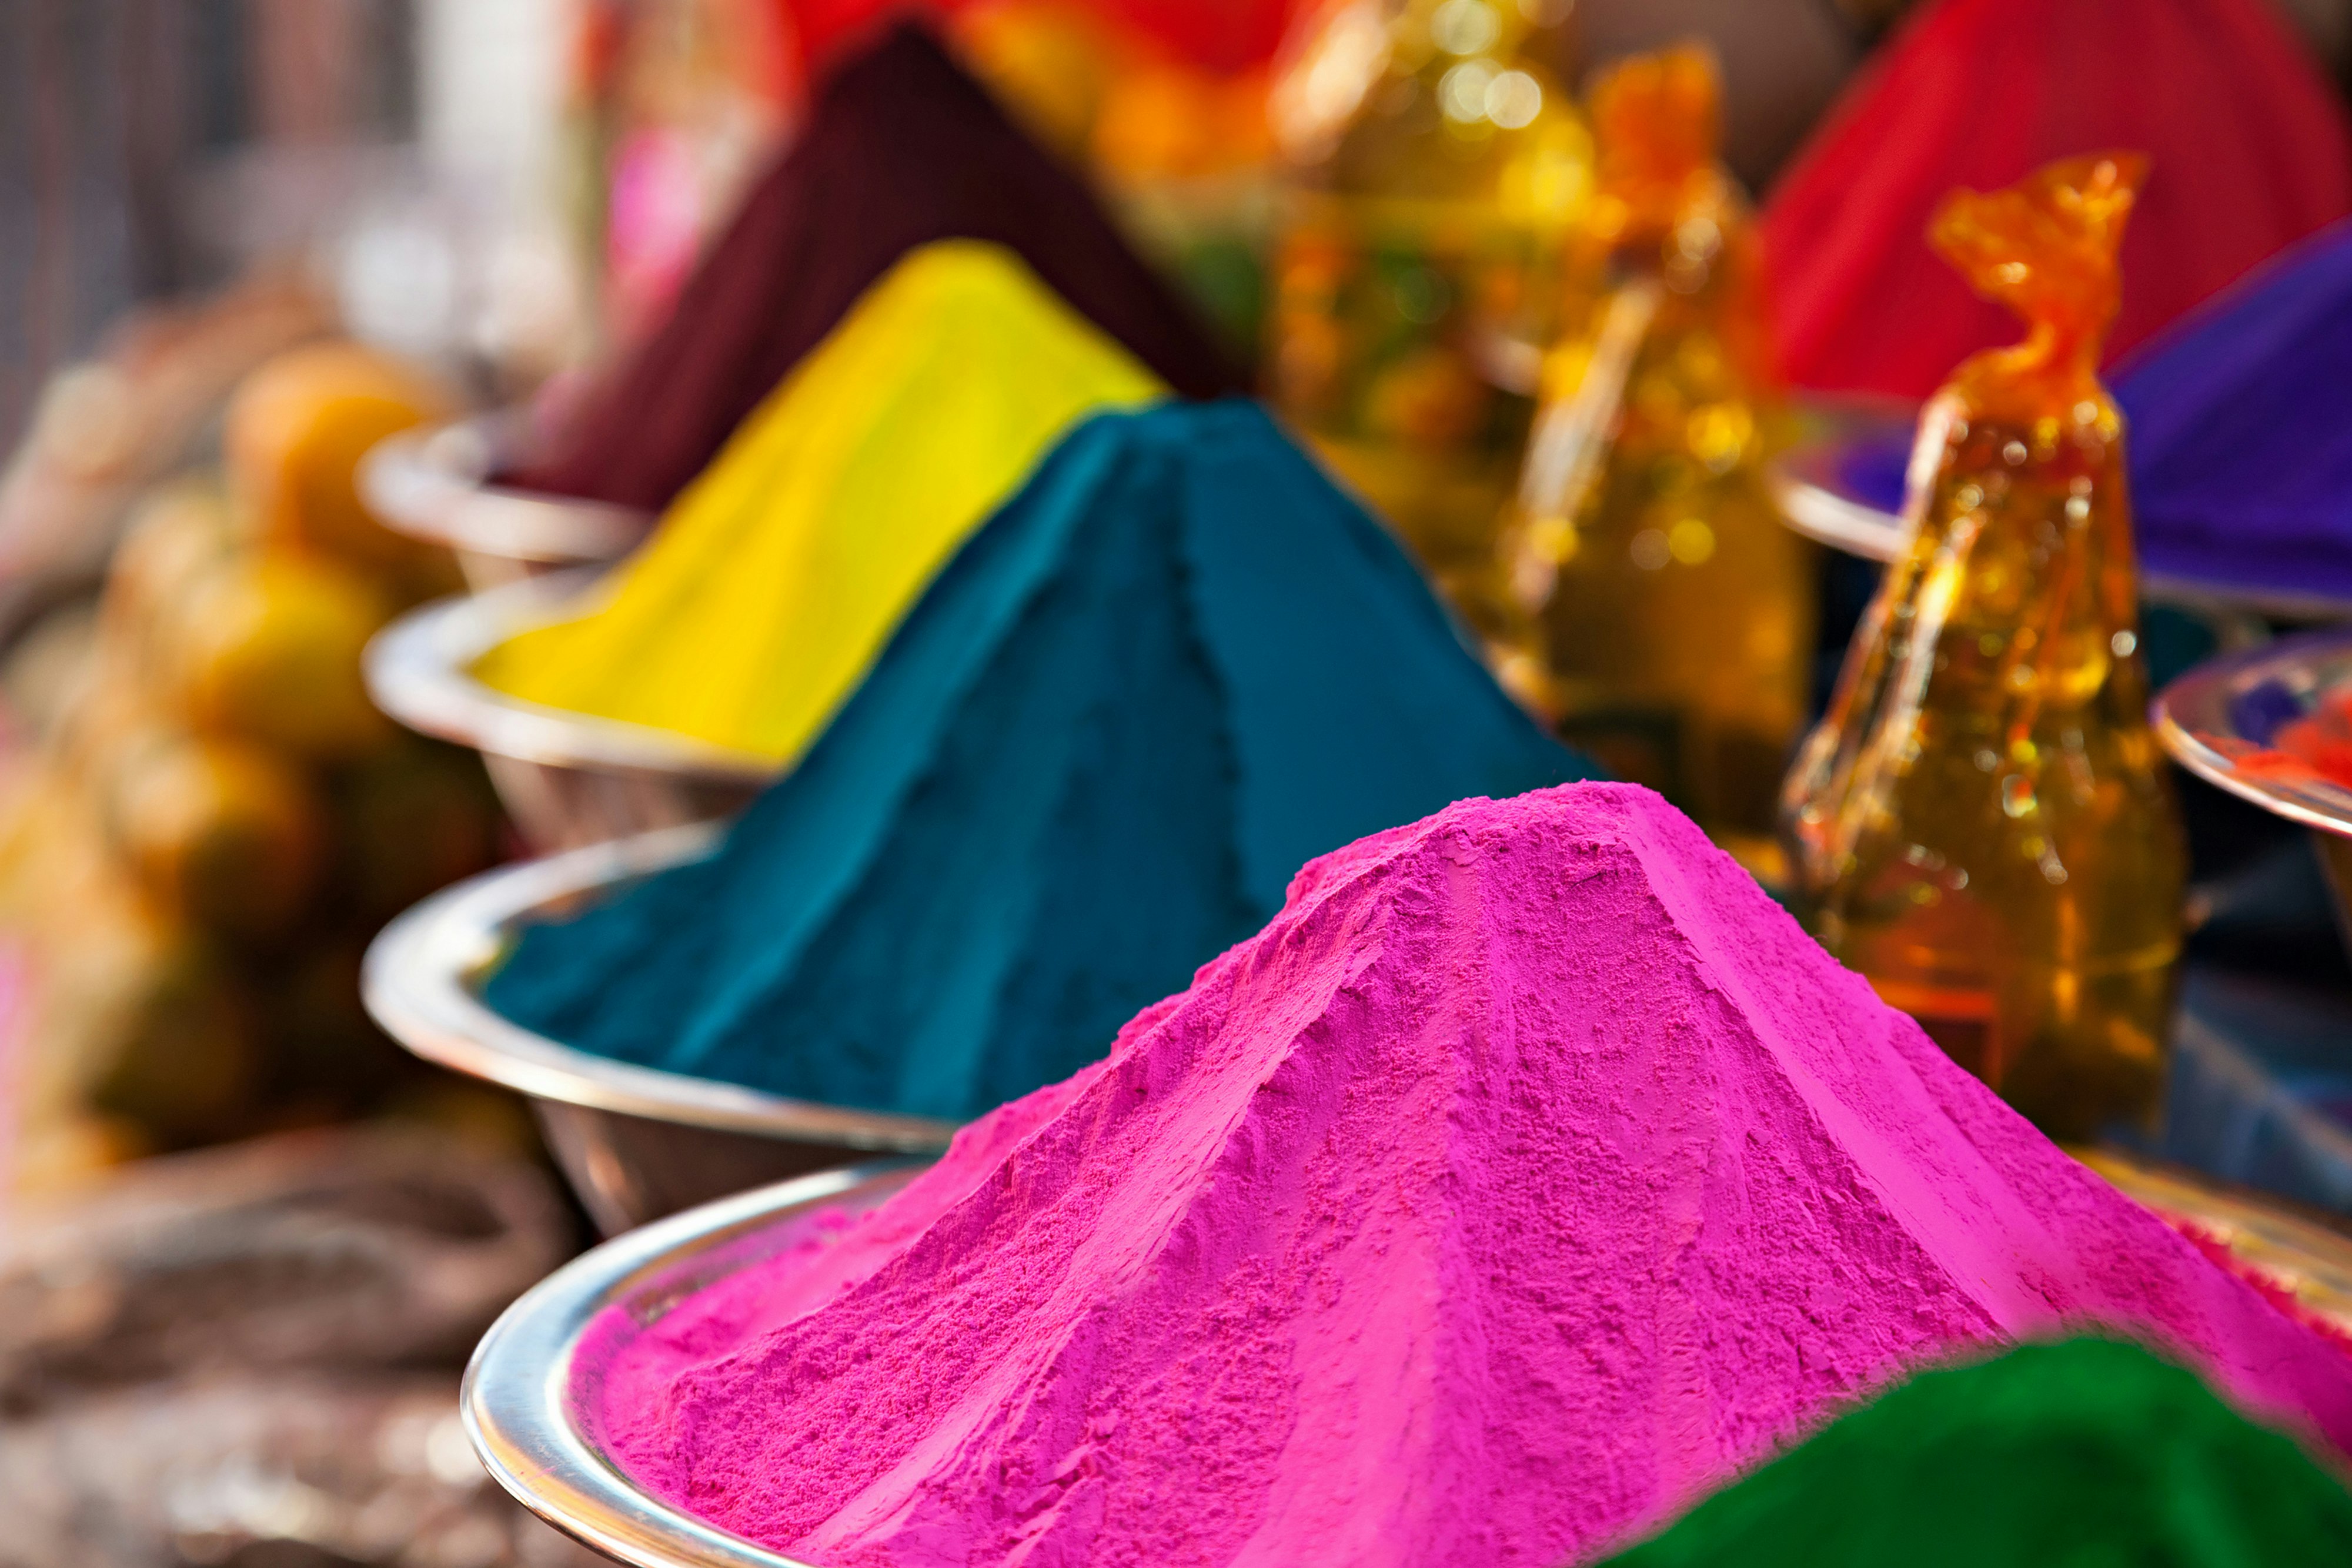 Piles of coloured powders in metallic bowls are on sale in a shop in India.